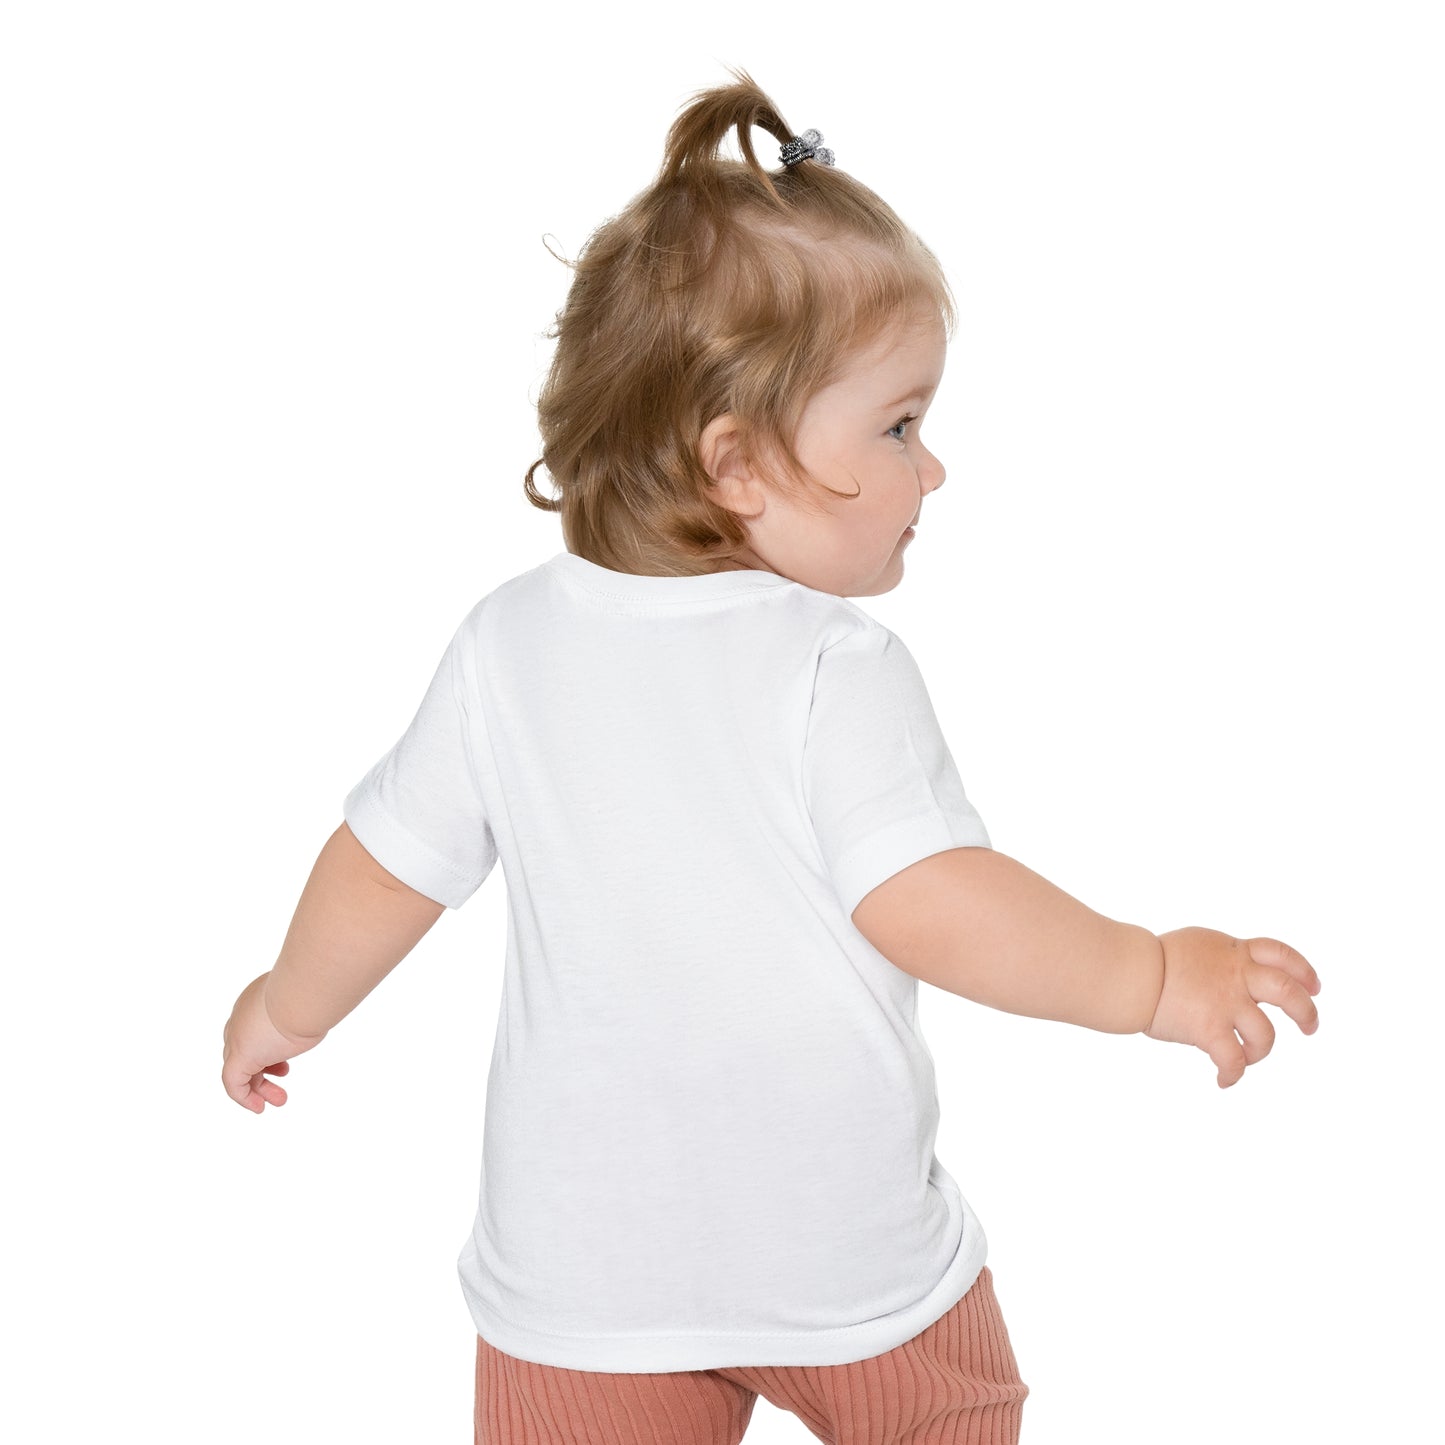 Pooping is Dope (little boy) Baby Short Sleeve T-Shirt